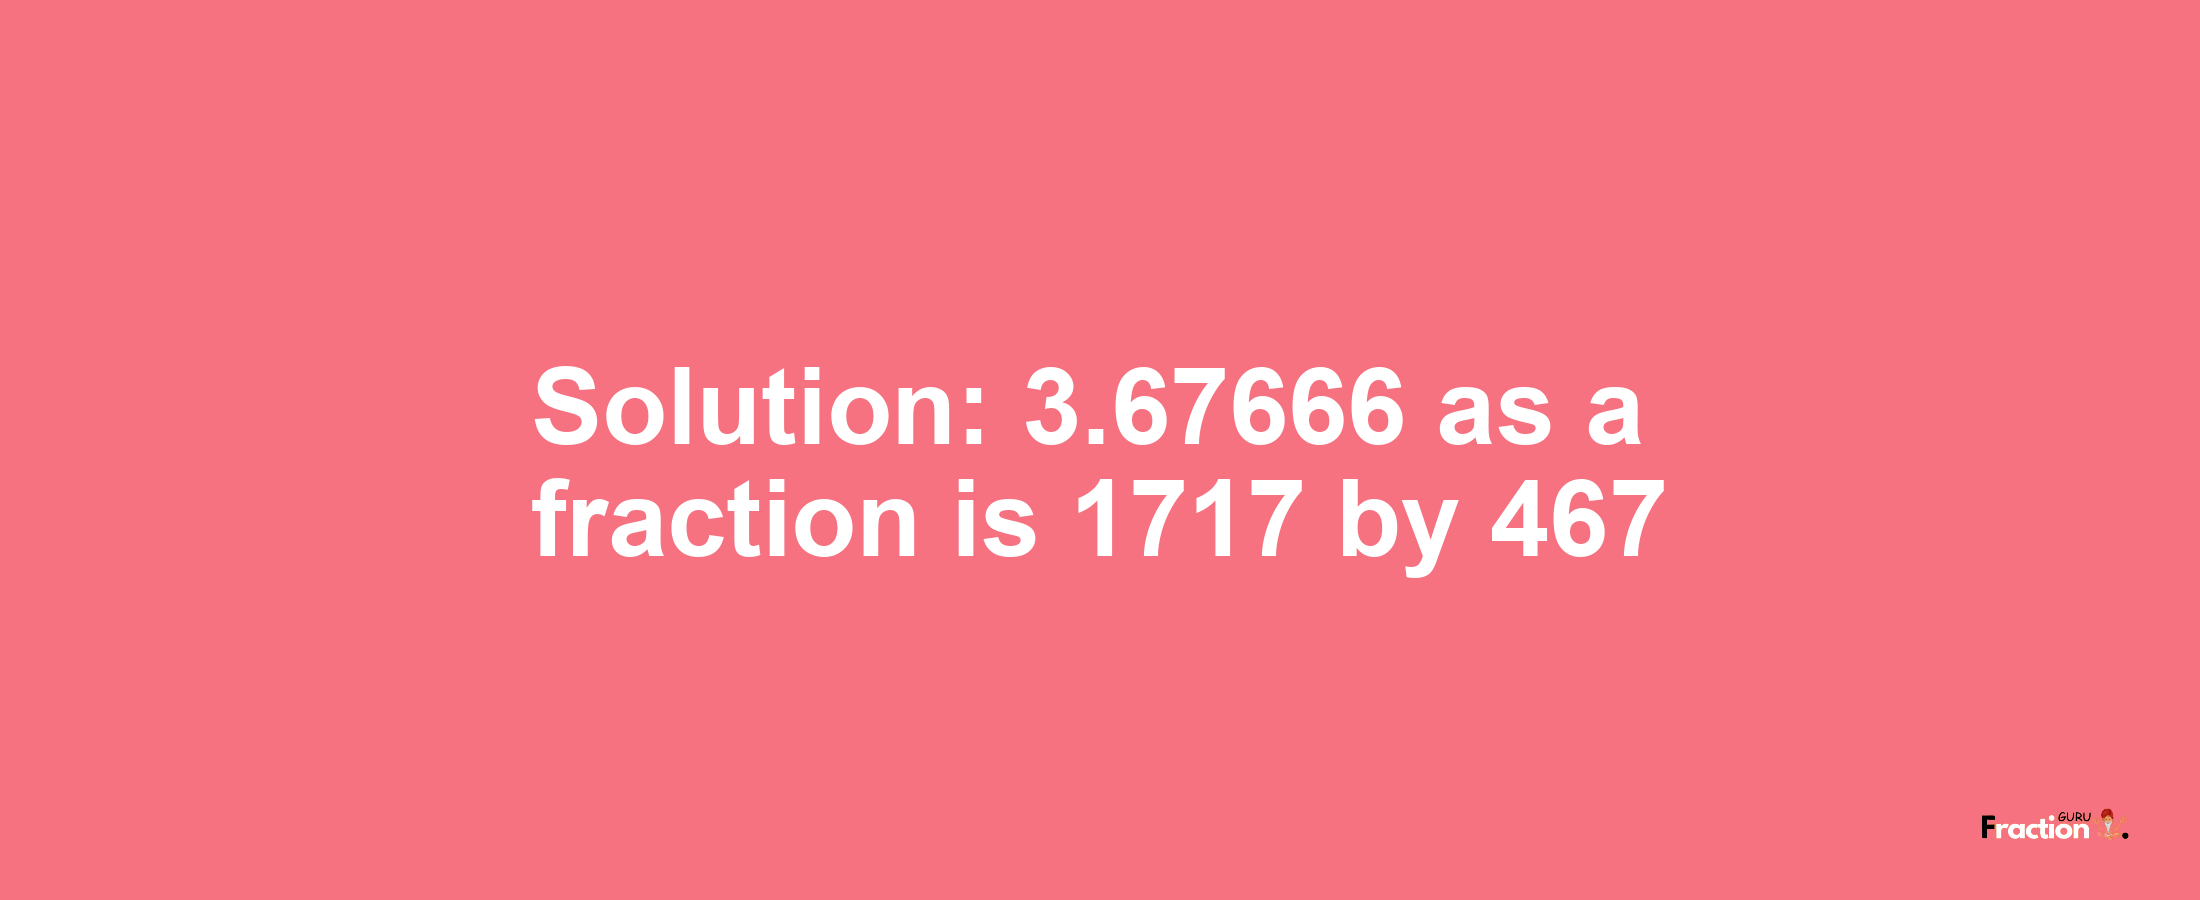 Solution:3.67666 as a fraction is 1717/467